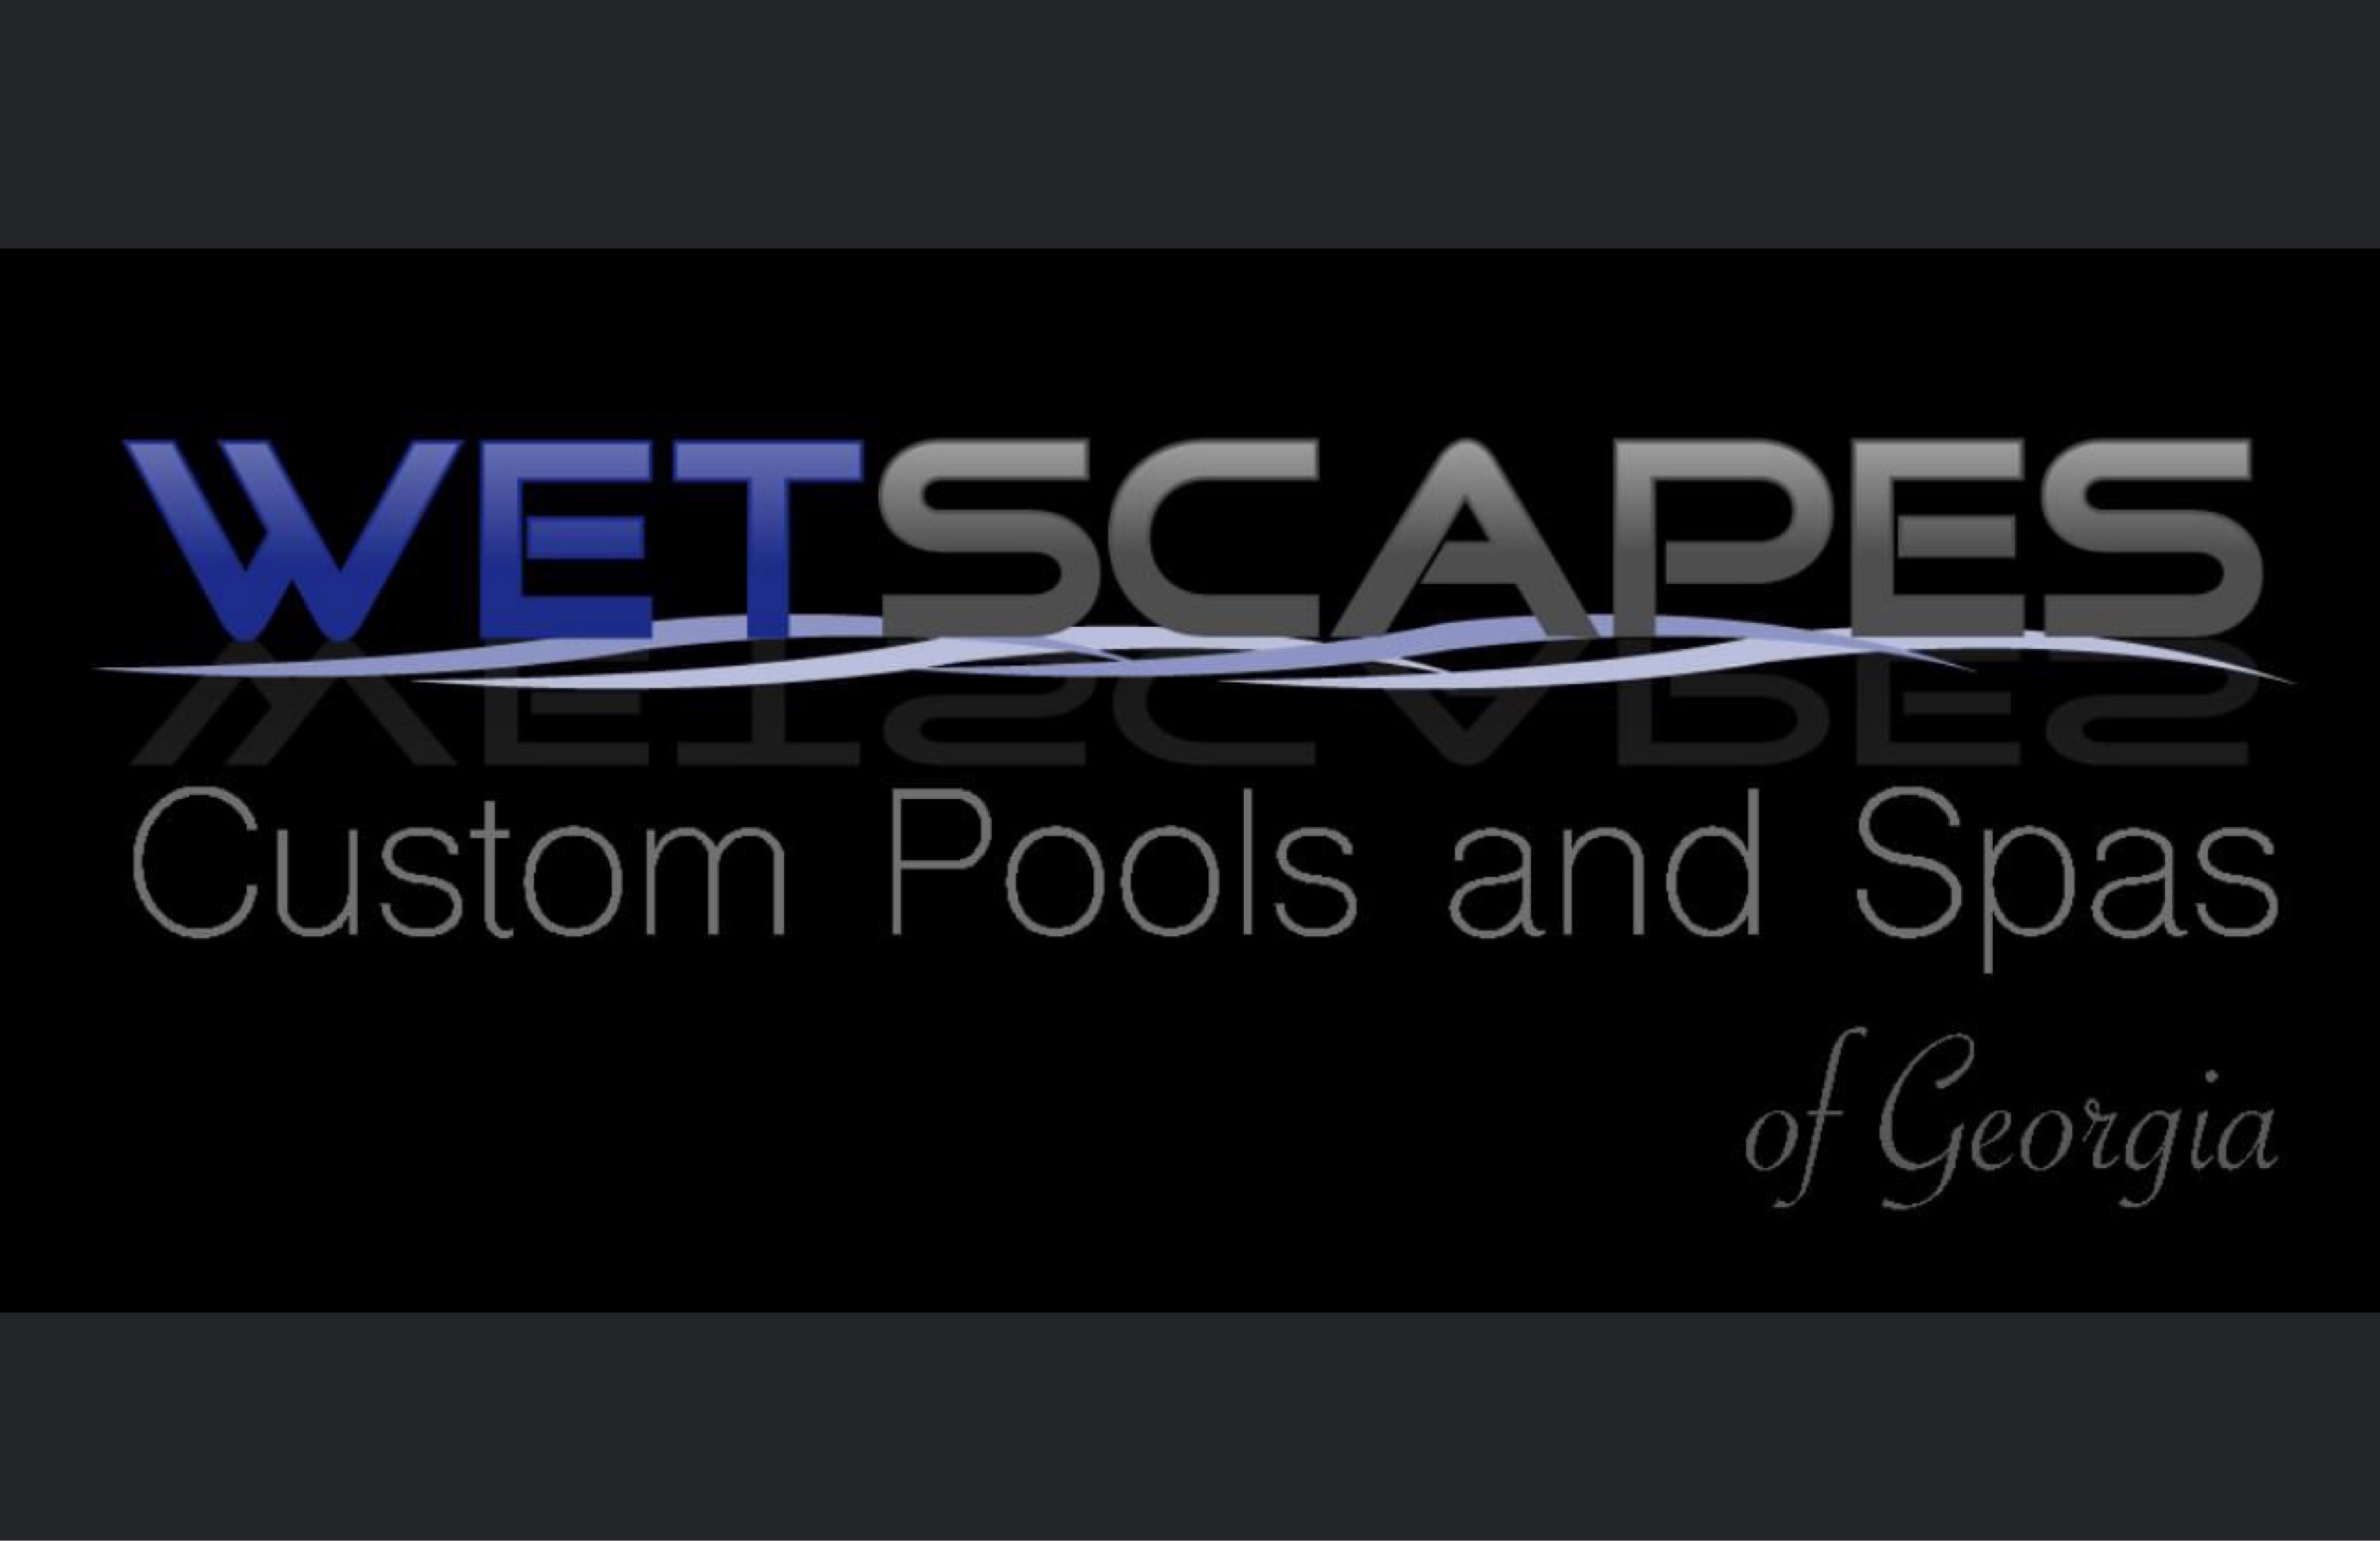 Wetscapes Custom Pools and Spas Logo